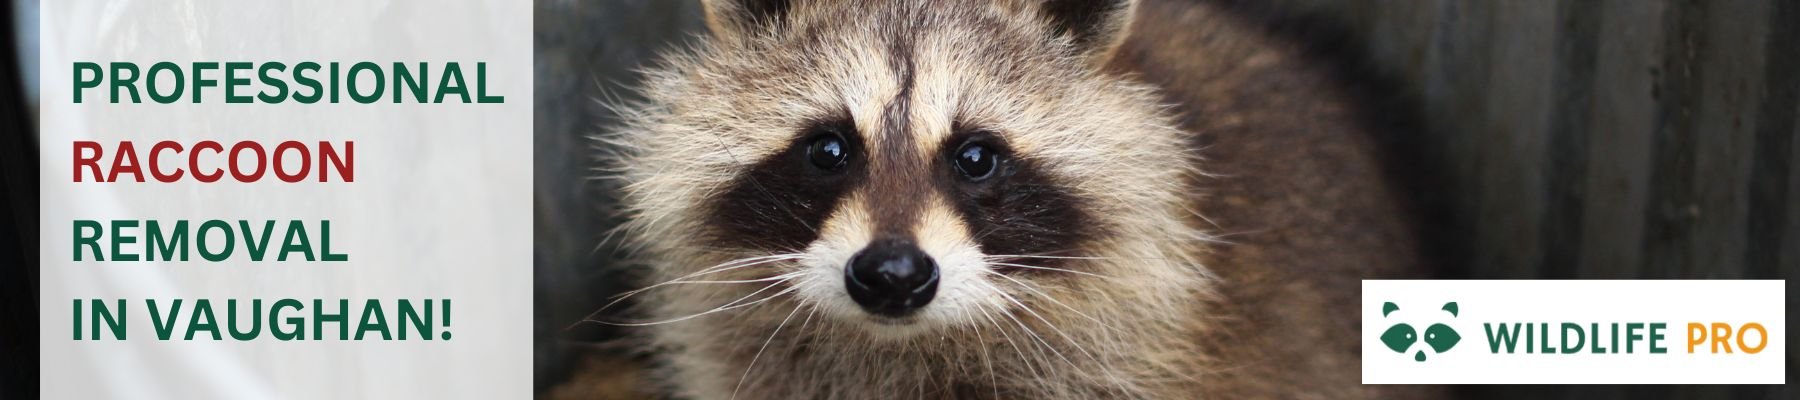 Professional Raccoon removal in Vaughan